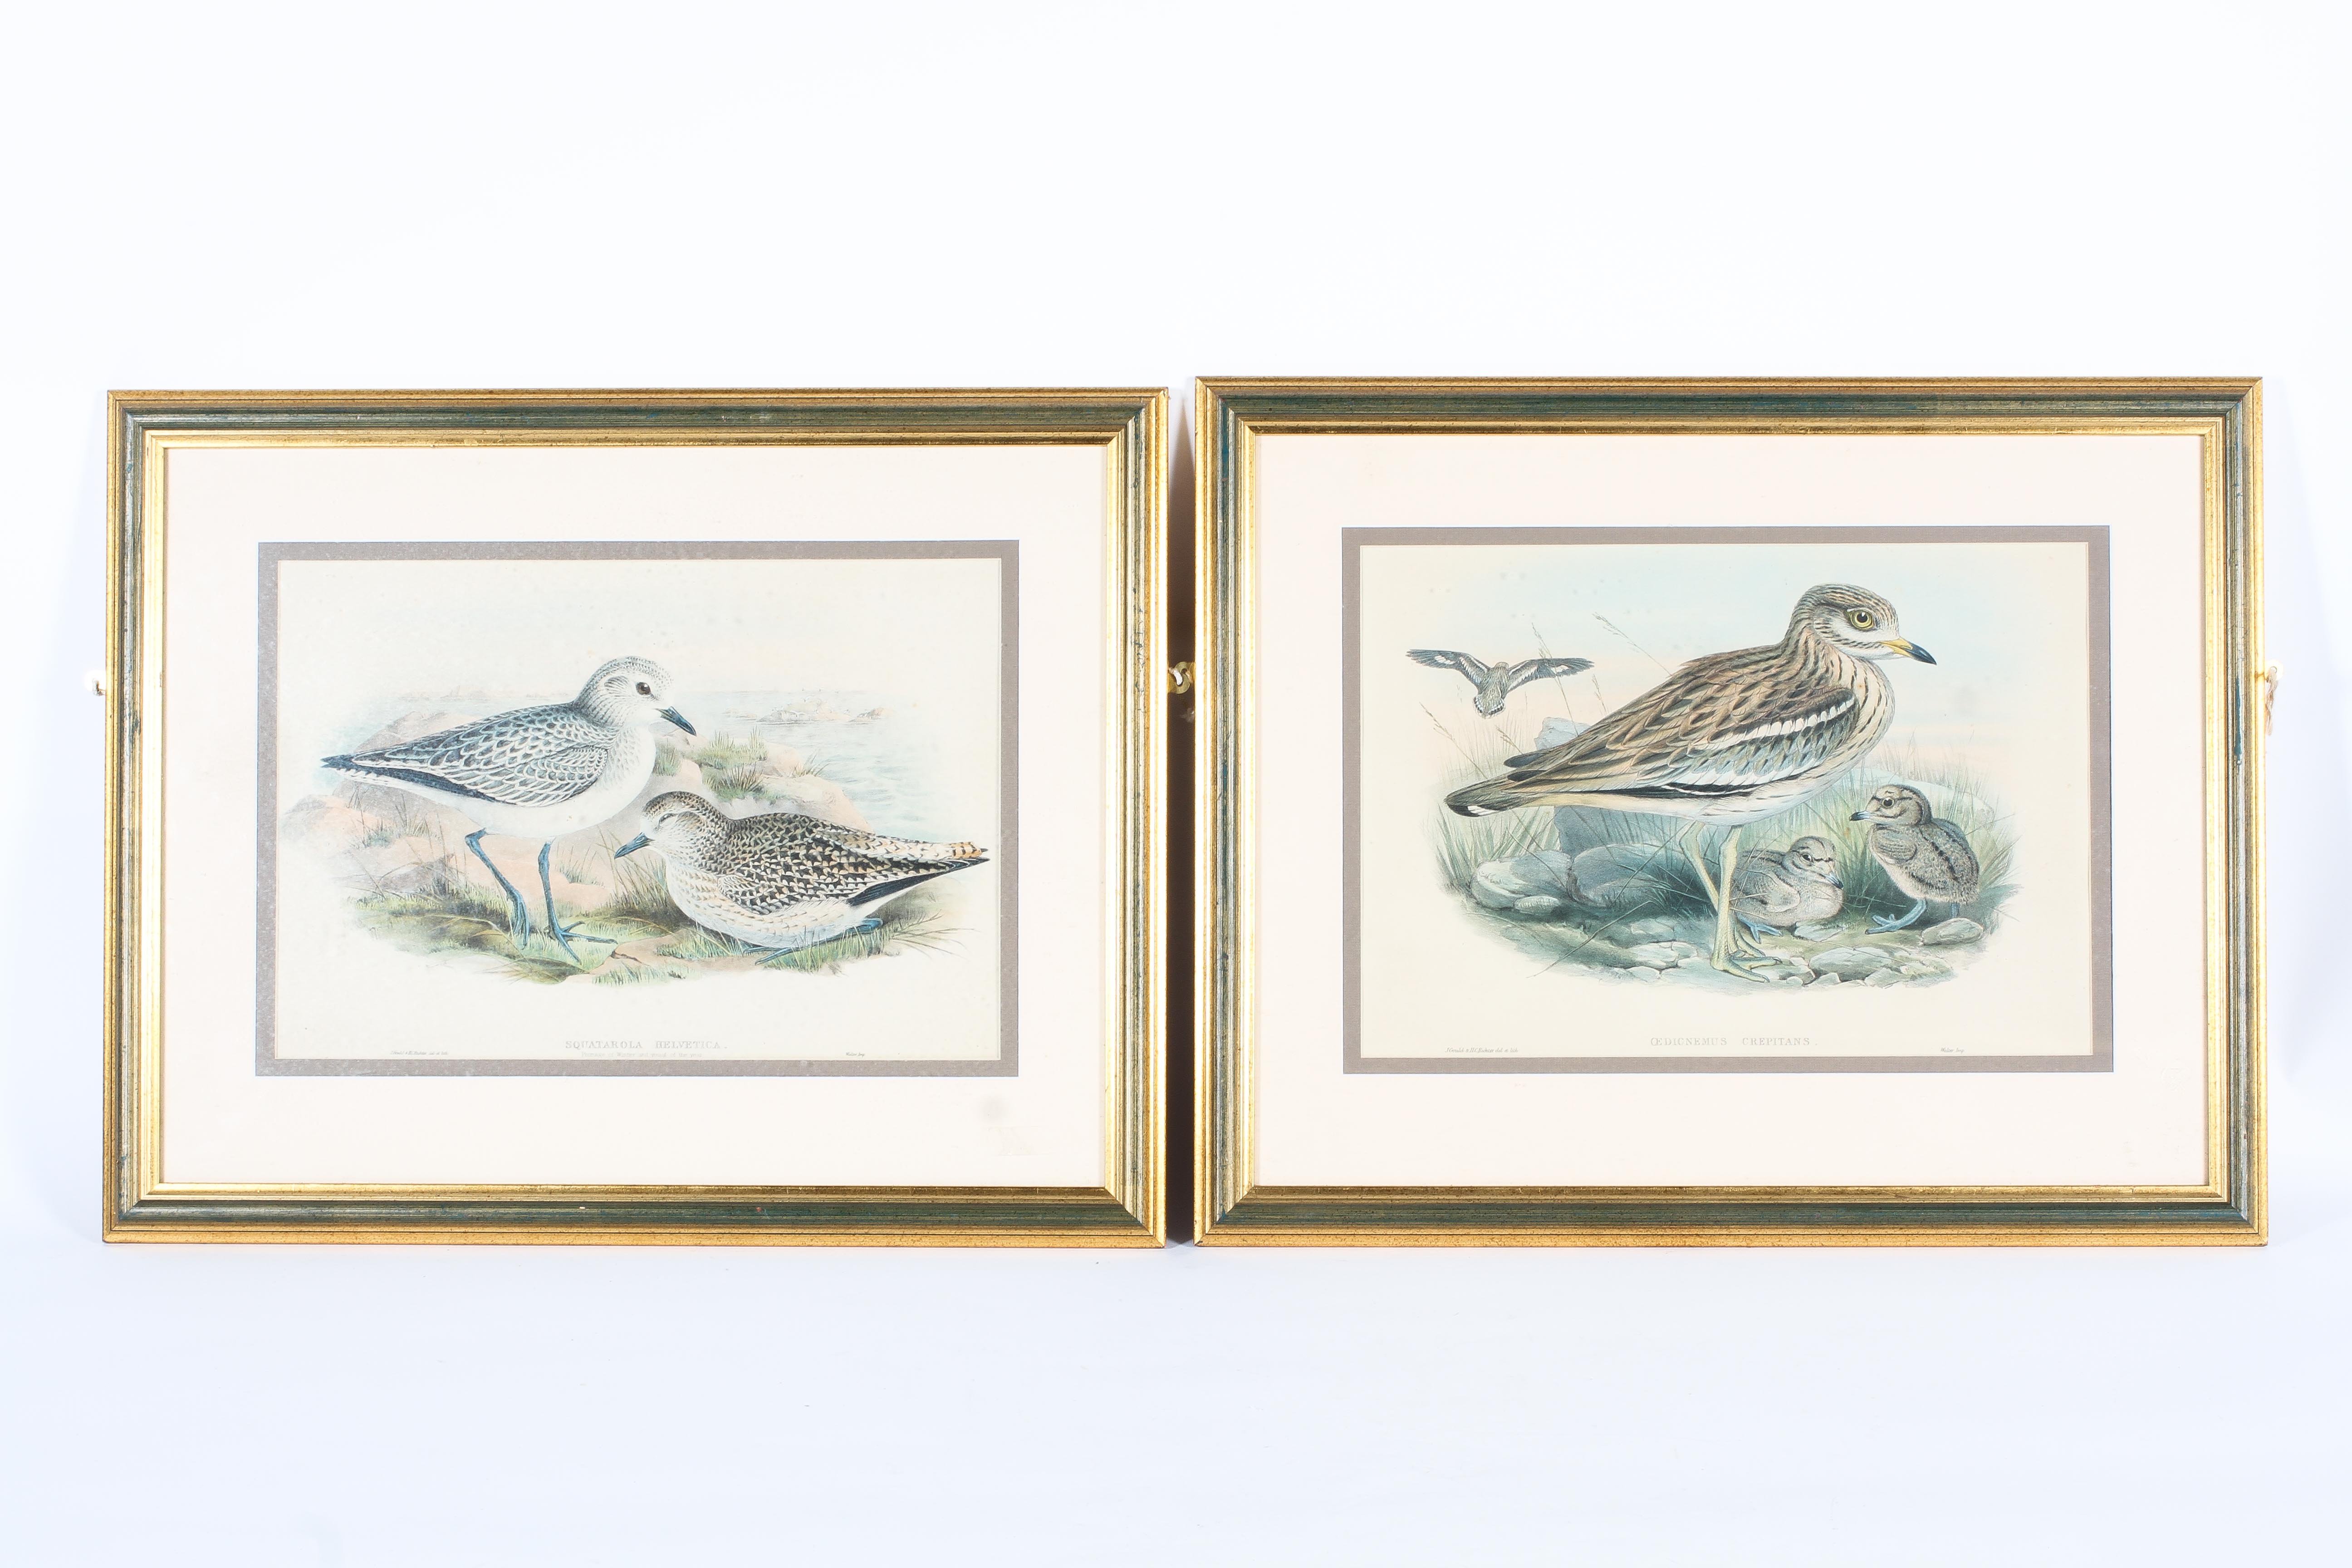 John Gould & Henry Constantine Richer (late 19th/early 20th century), two lithographs.